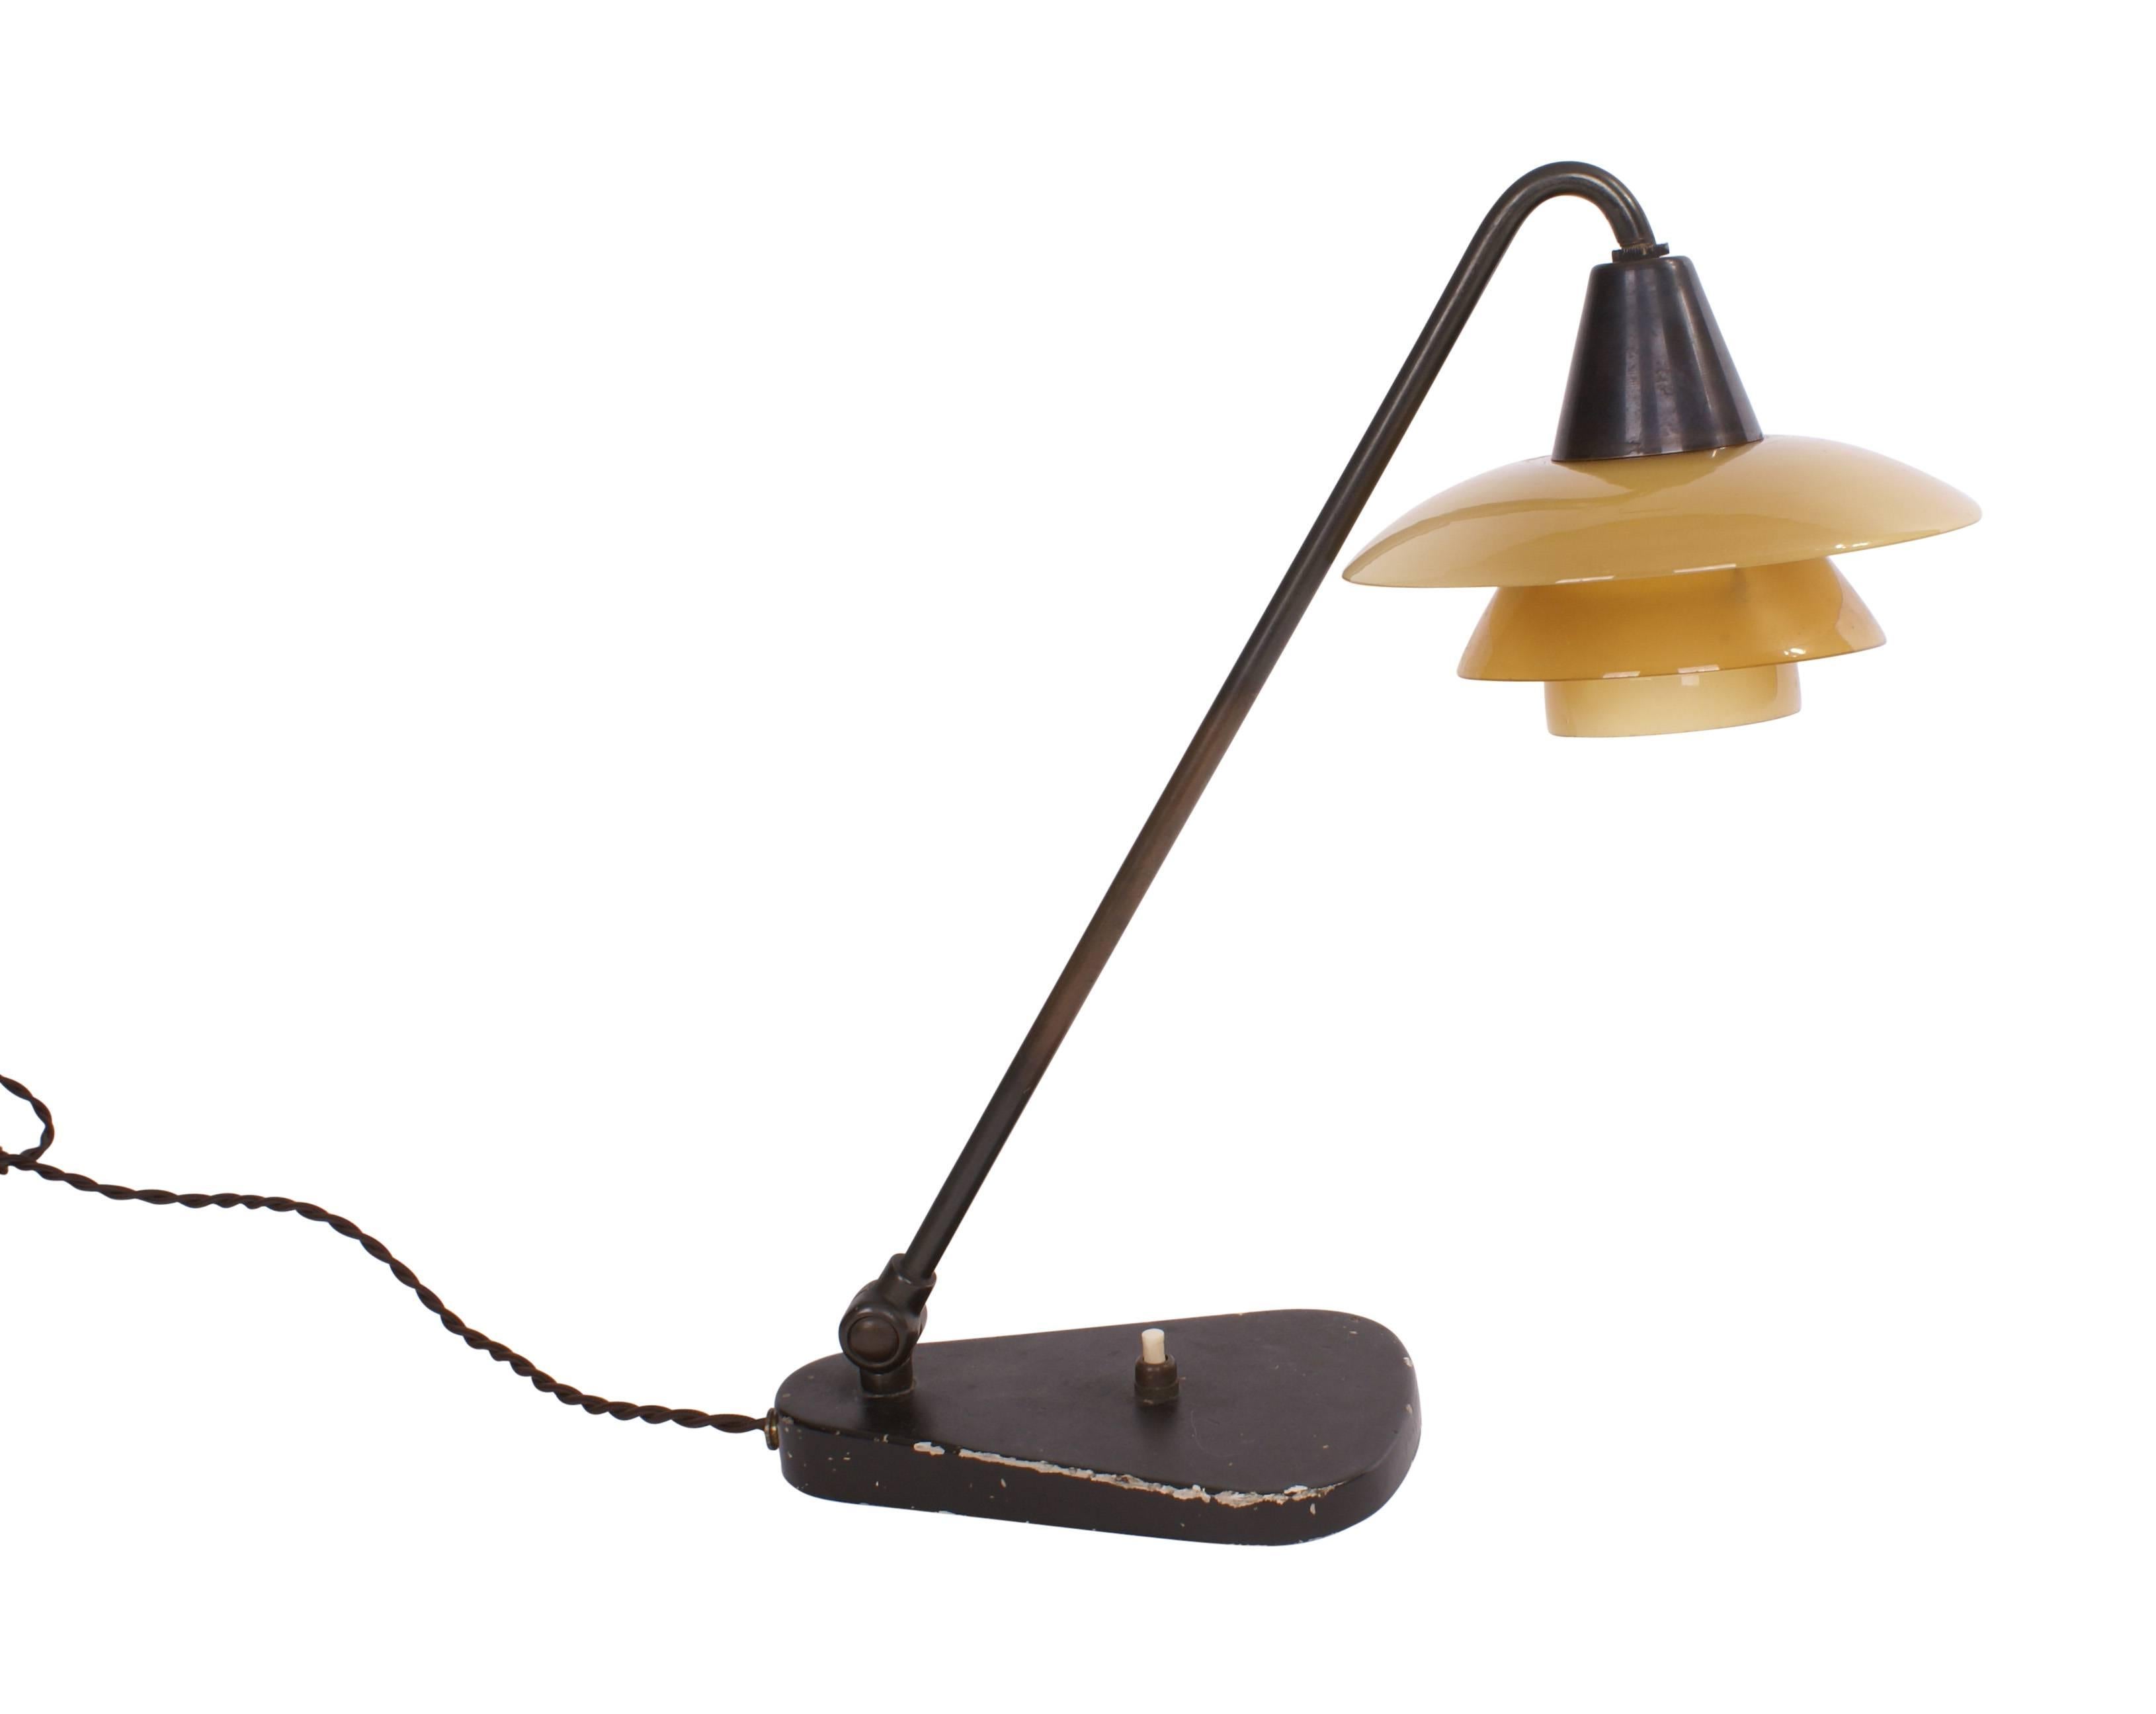 Mid-20th Century Poul Henningsen PH 1/1 1940s Piano Lamp For Sale